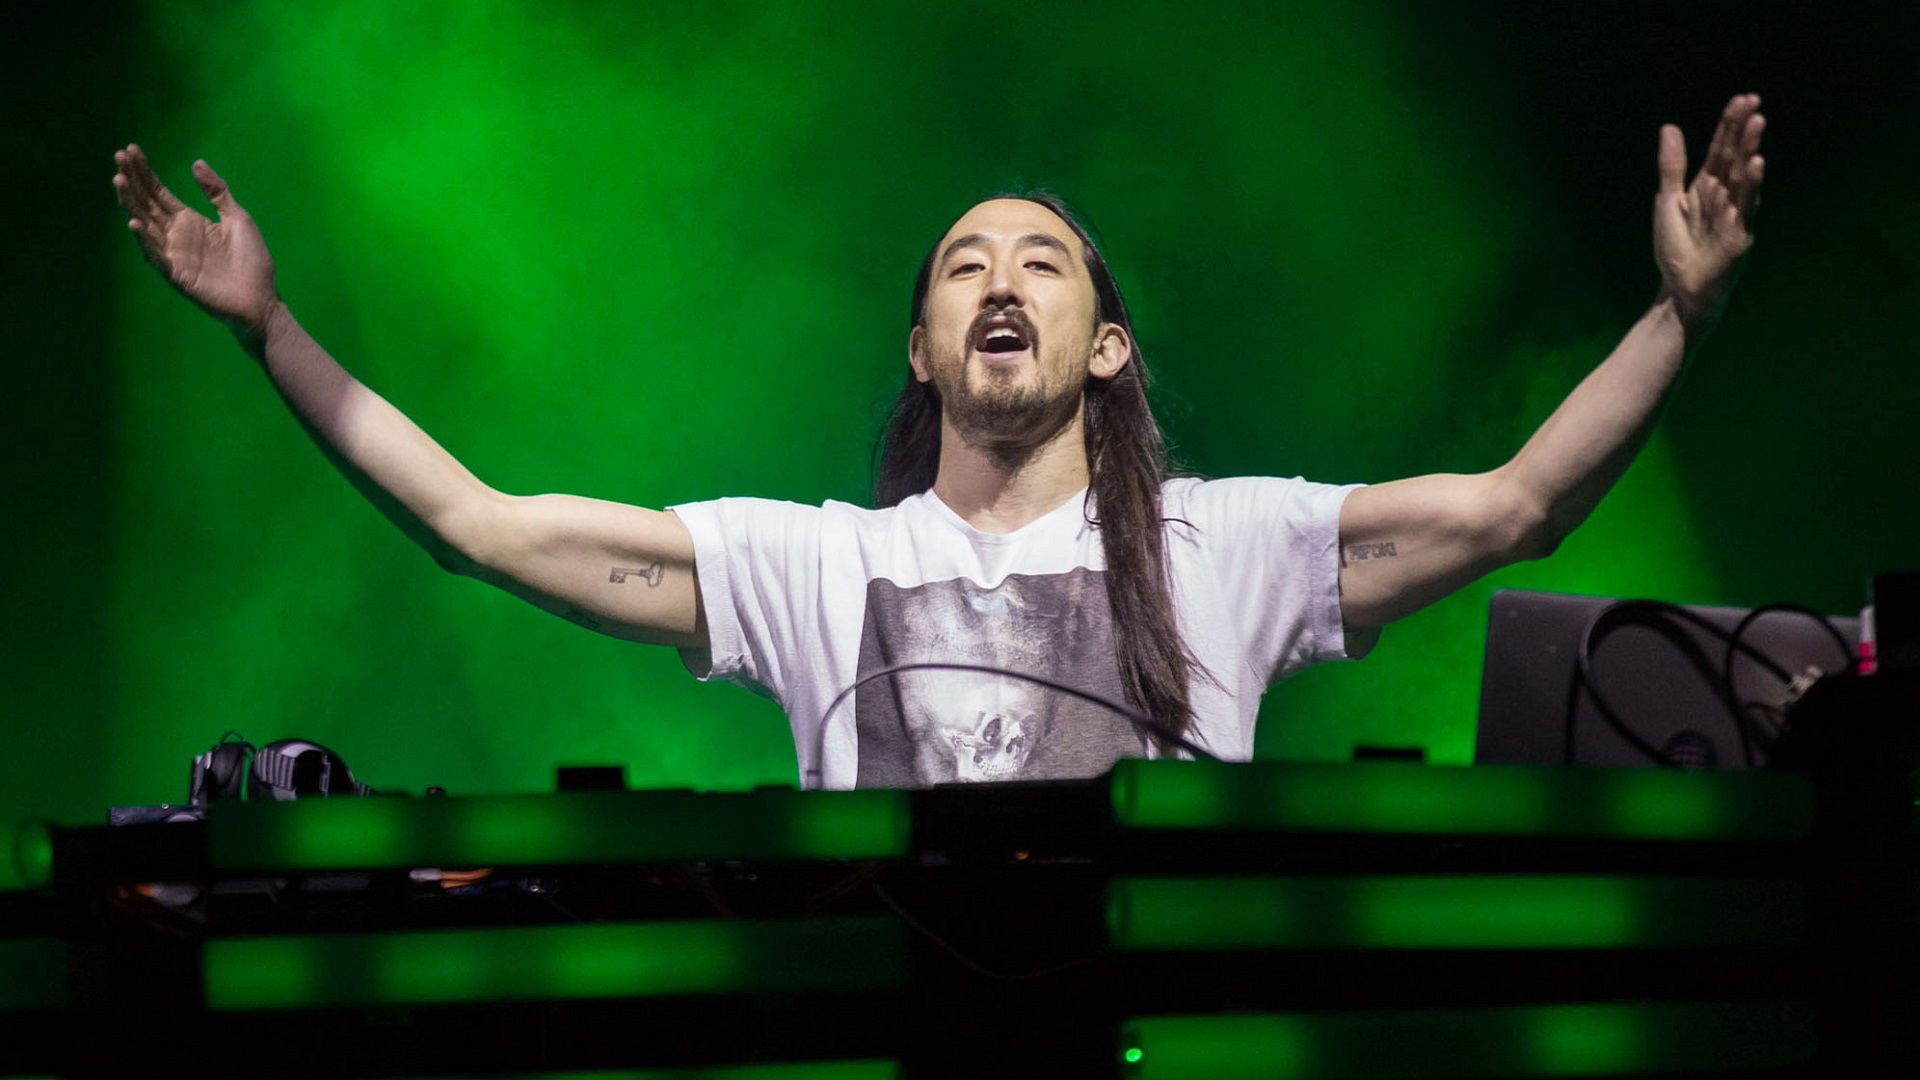 Steve Aoki Wallpaper Image Photos Pictures Background